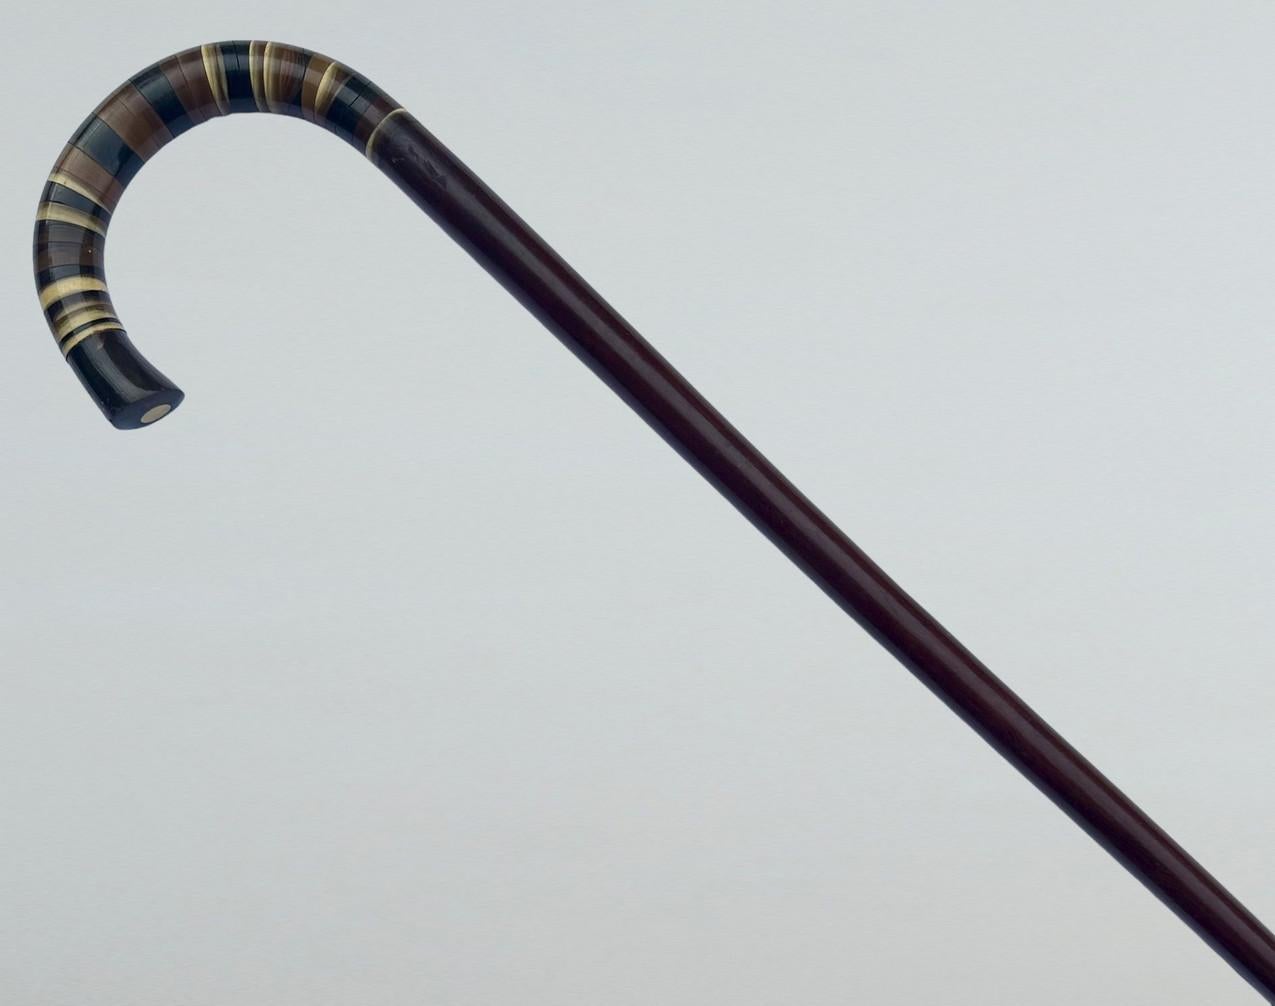 Stylish Solid Polished Dark Brown Malacca Wood and Sectional Horn Crook Handle in colours Lady’s or Gentleman’s Walking Stick or Cane with Traditional ornately cast Crook shaped handle, of French or English origin, complete with its original horn